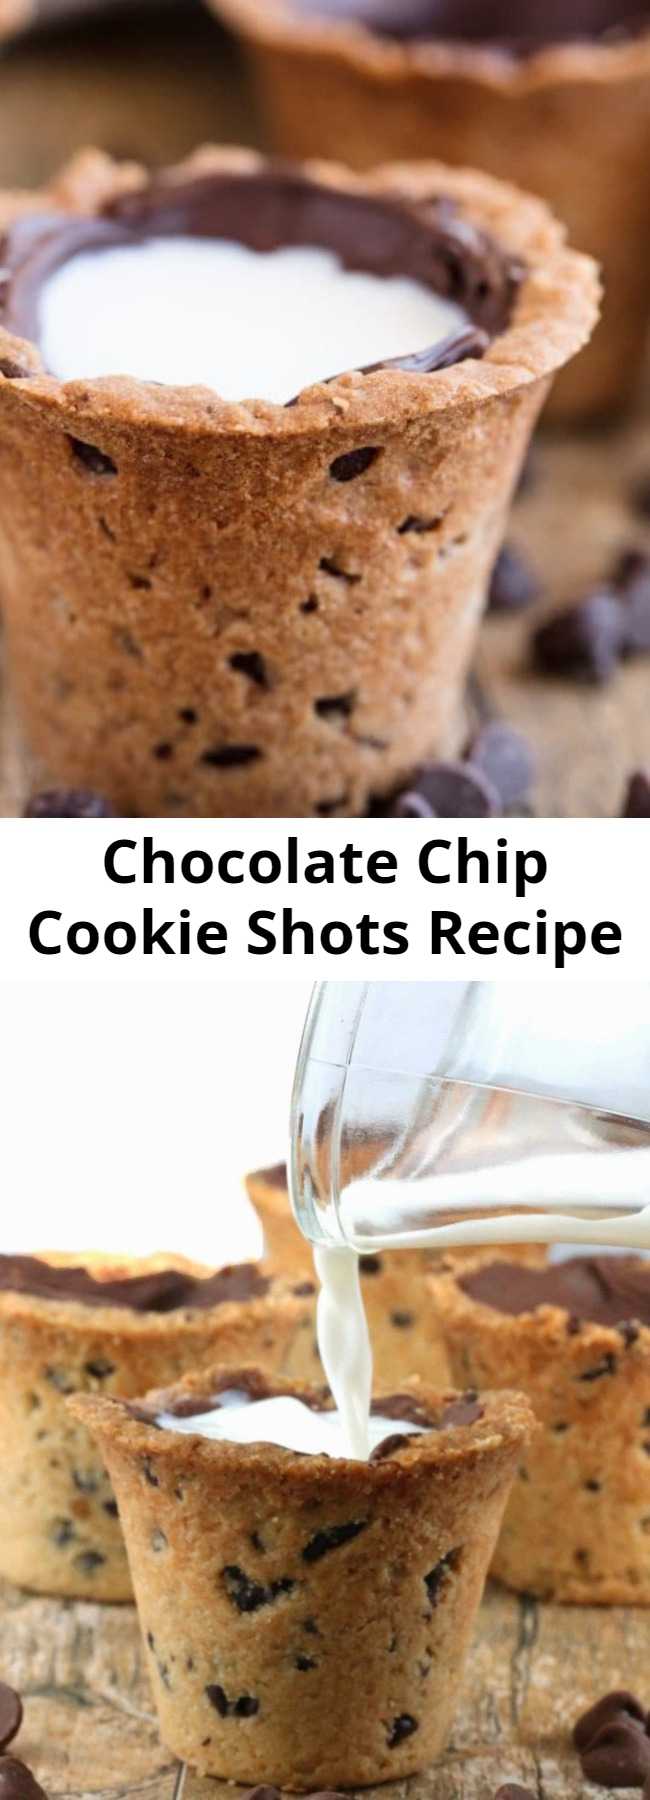 Chocolate Chip Cookie Shots Recipe - Drink your milk and cookies straight from a Chocolate Chip Cookie Shot glass! This fun dessert makes for a great party food. So much fun!